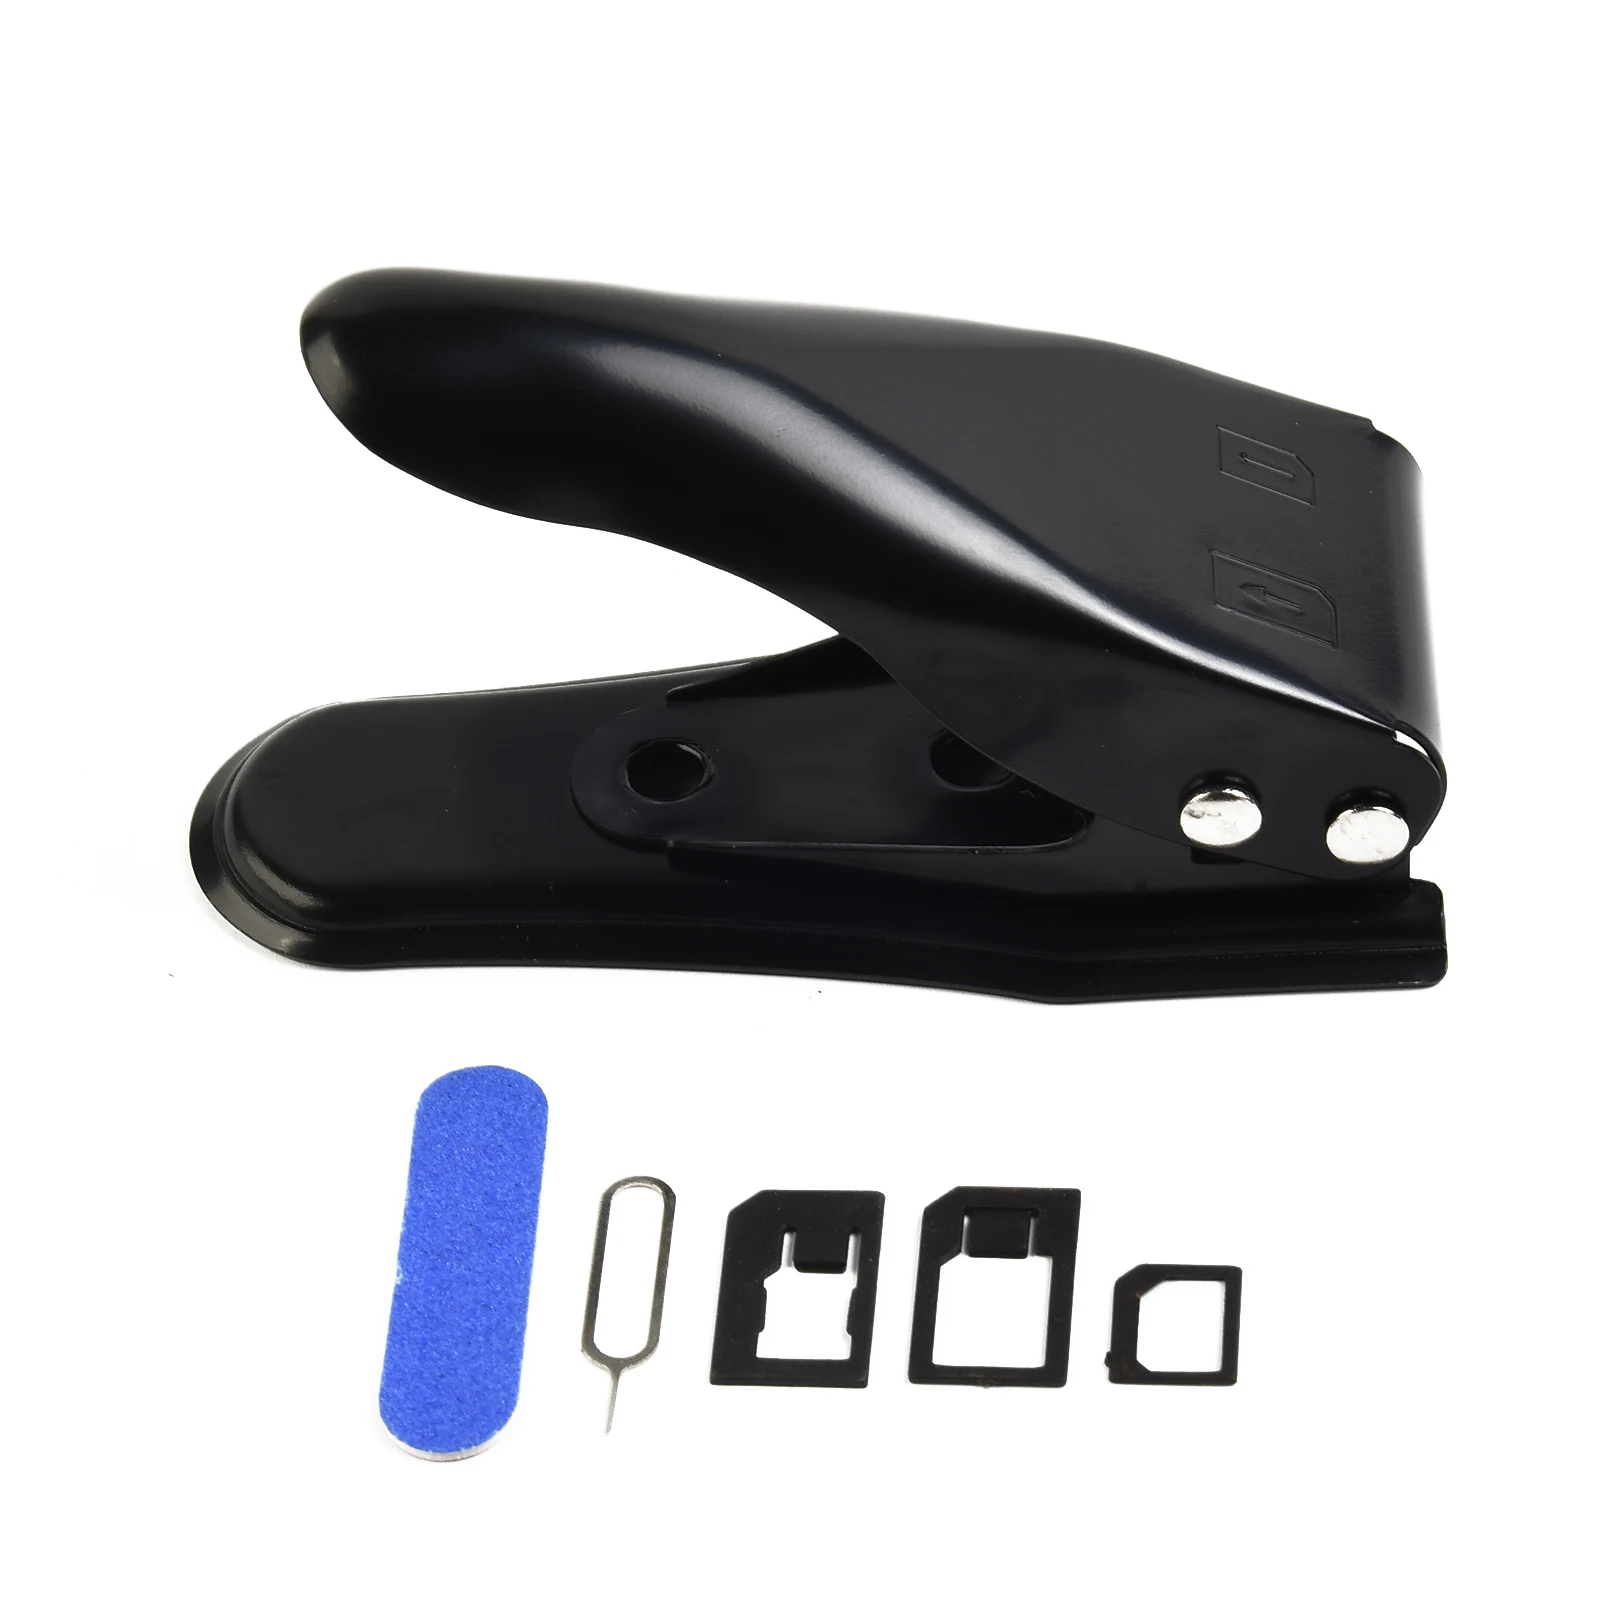 2023 Sim Card Cutter Adapter Alloy Steel Black Correct Cut Cutting Tool Eject Pin Precise Fit Simple